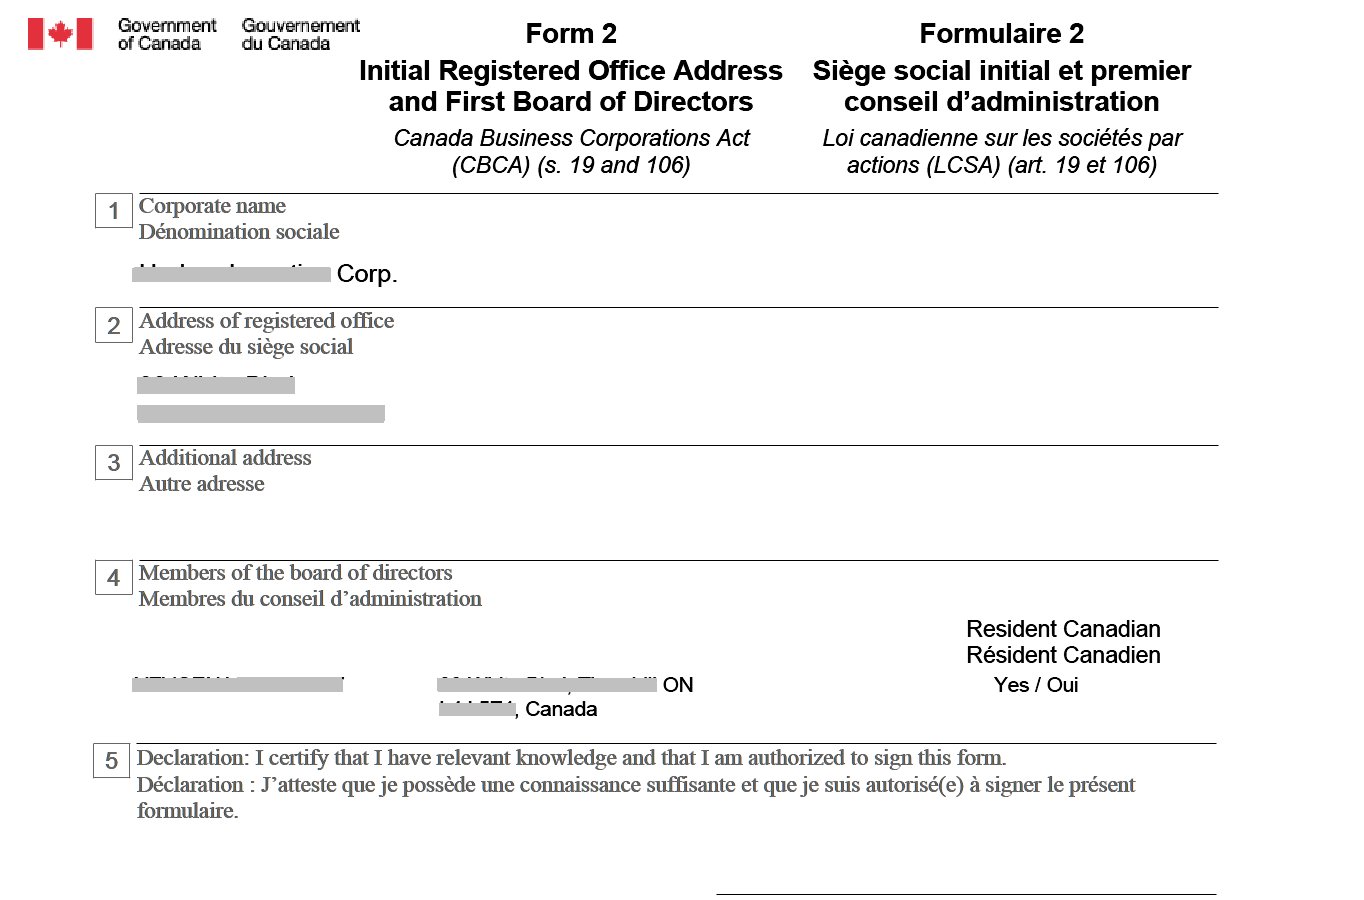 Articles of Incorporation Form 2